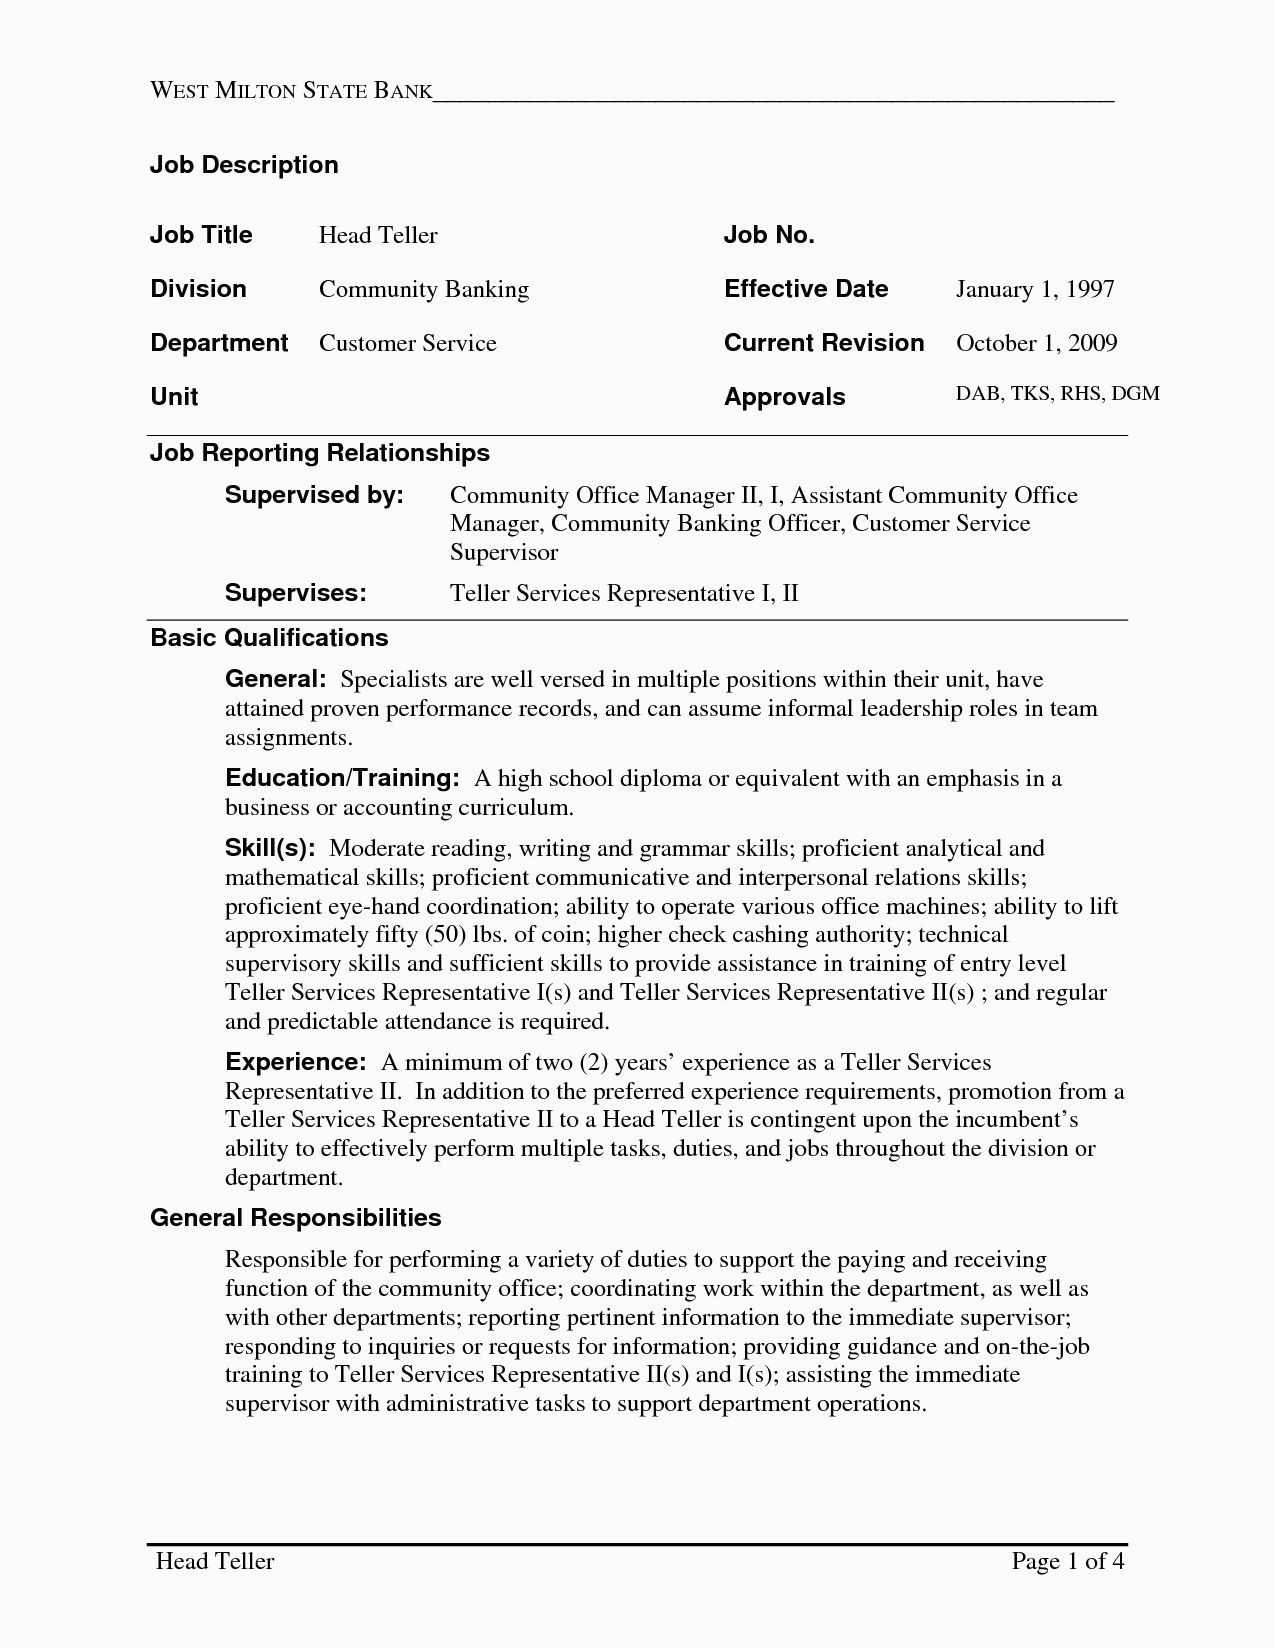 Bank Teller Resume No Experience Sample Pin by Calendar 2019 2020 On Latest Resume